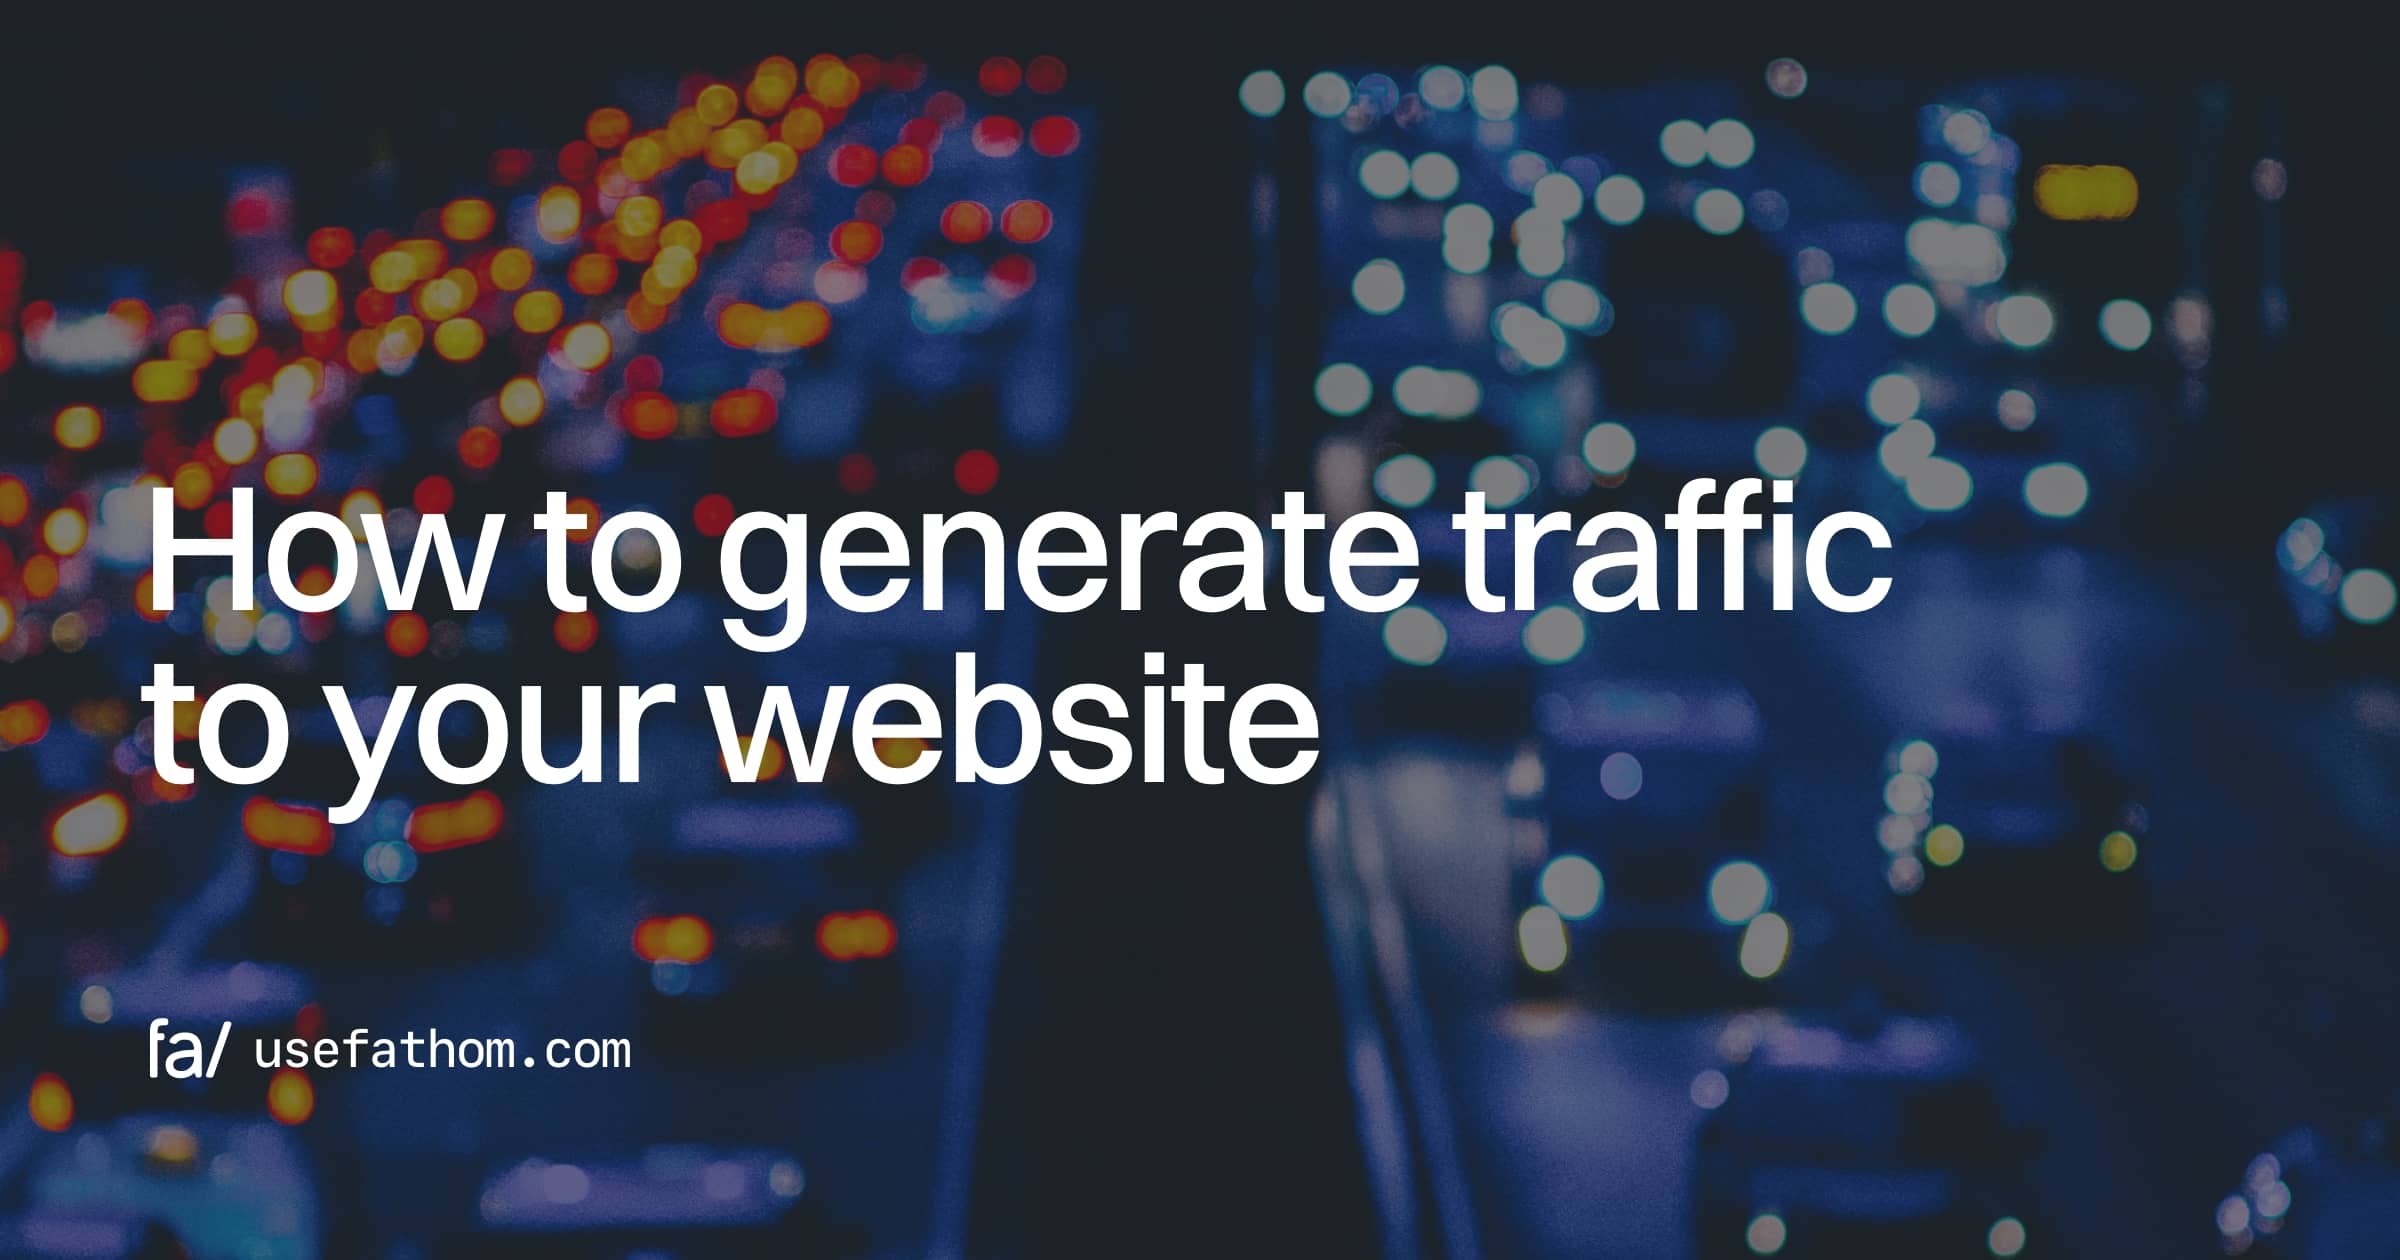 How to generate traffic to your website (so analytics become useful)